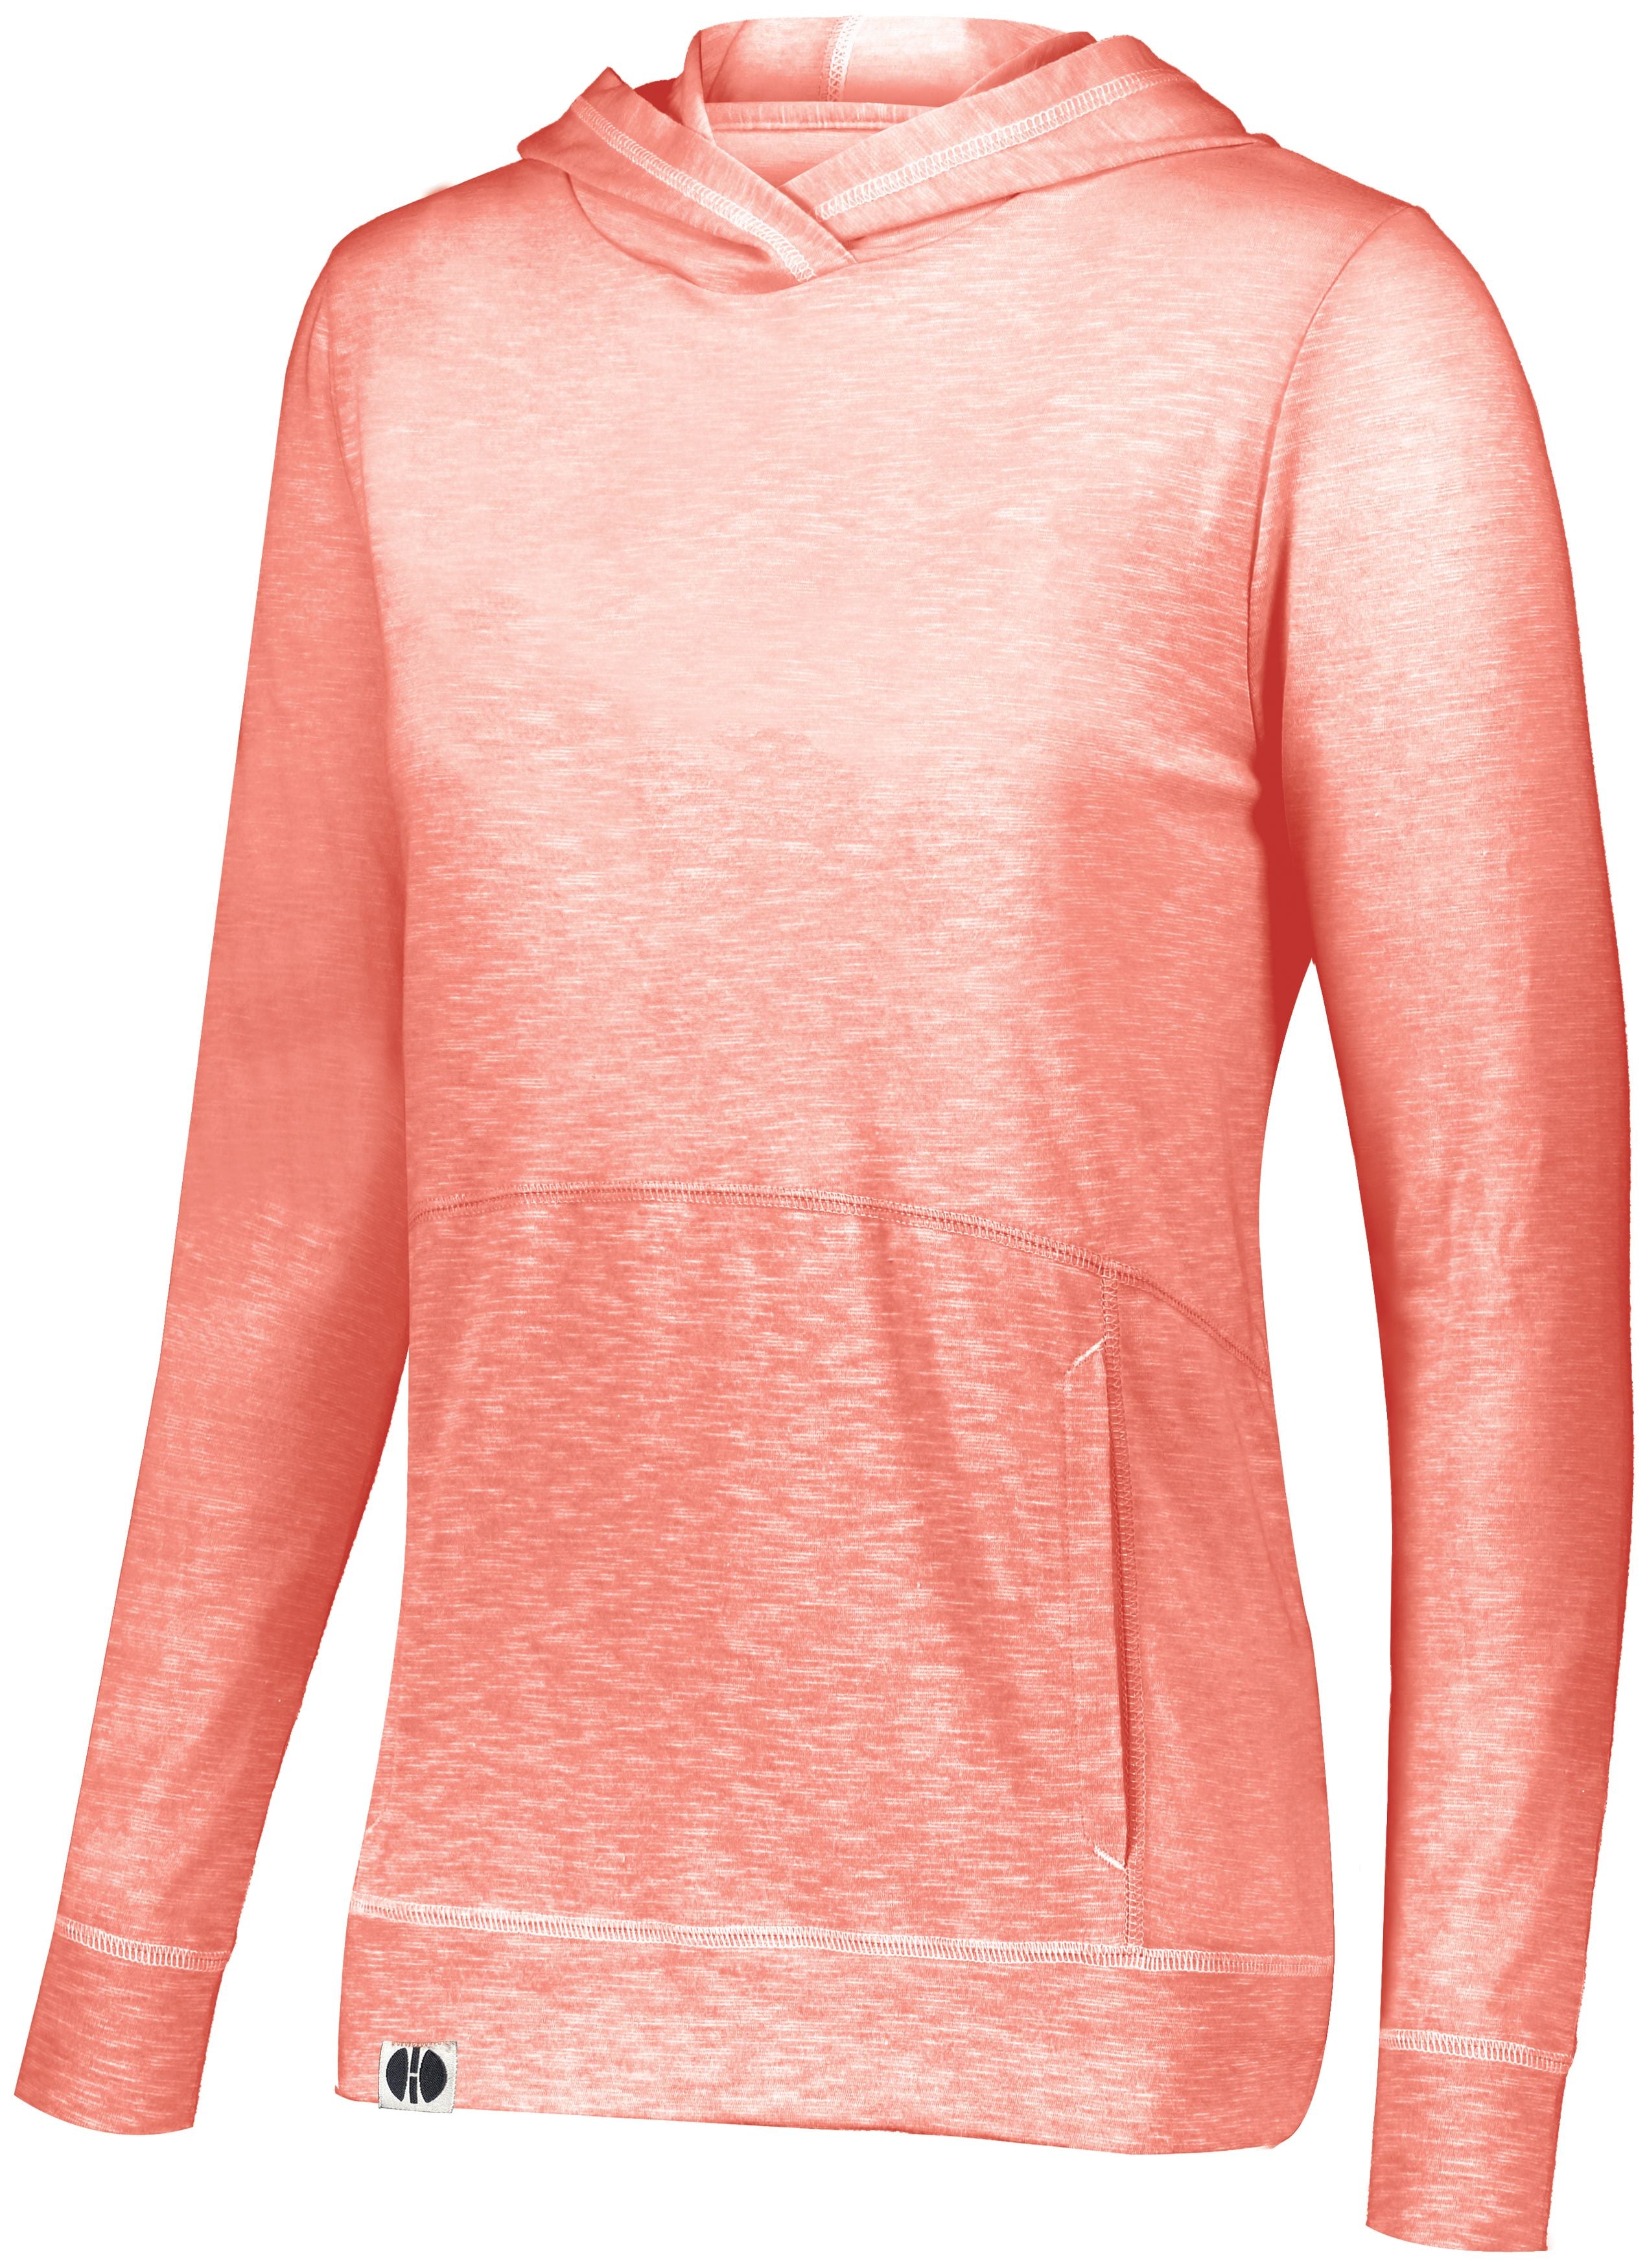 Holloway Ladies Journey Hoodie in Coral  -Part of the Ladies, Ladies-Hoodie, Hoodies, Holloway product lines at KanaleyCreations.com